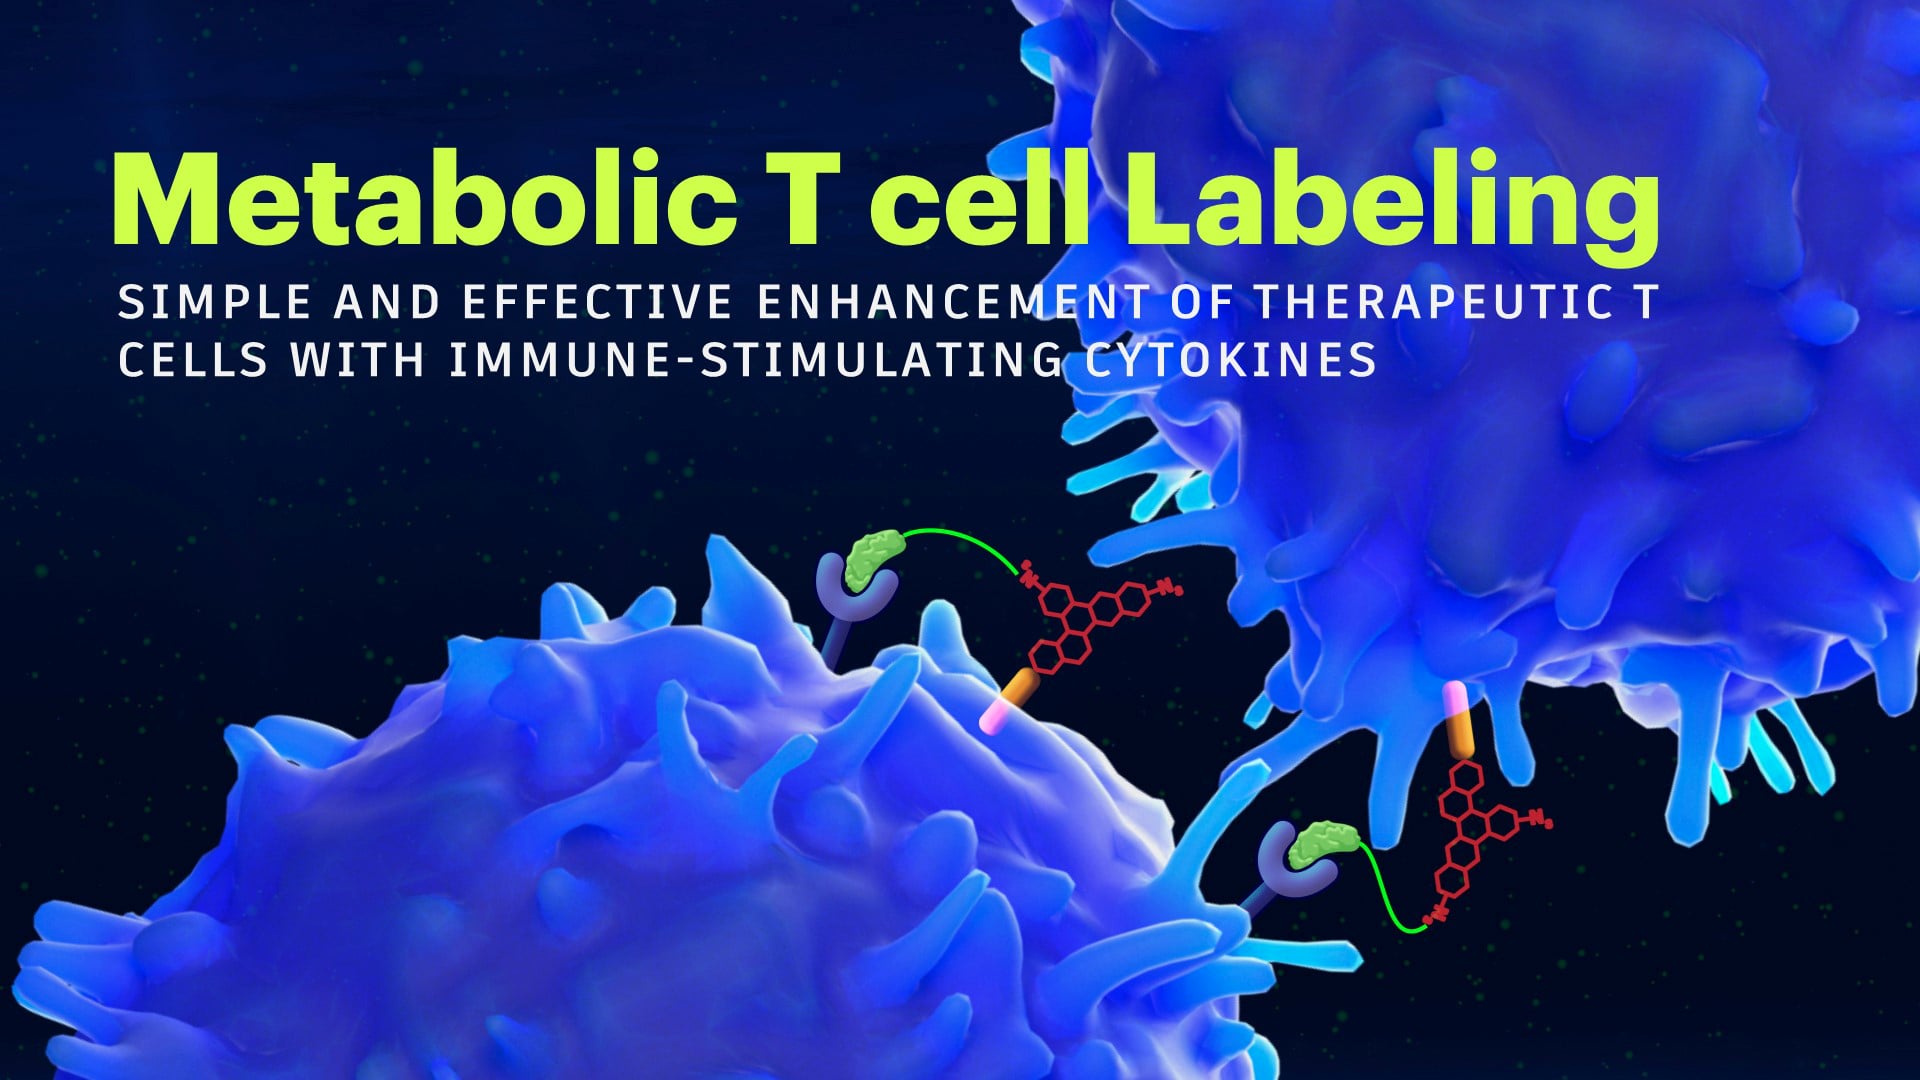 Metabolic T cell Labeling: simple and effective enhancement of therapeutic T cells with immune-stimulating cytokines